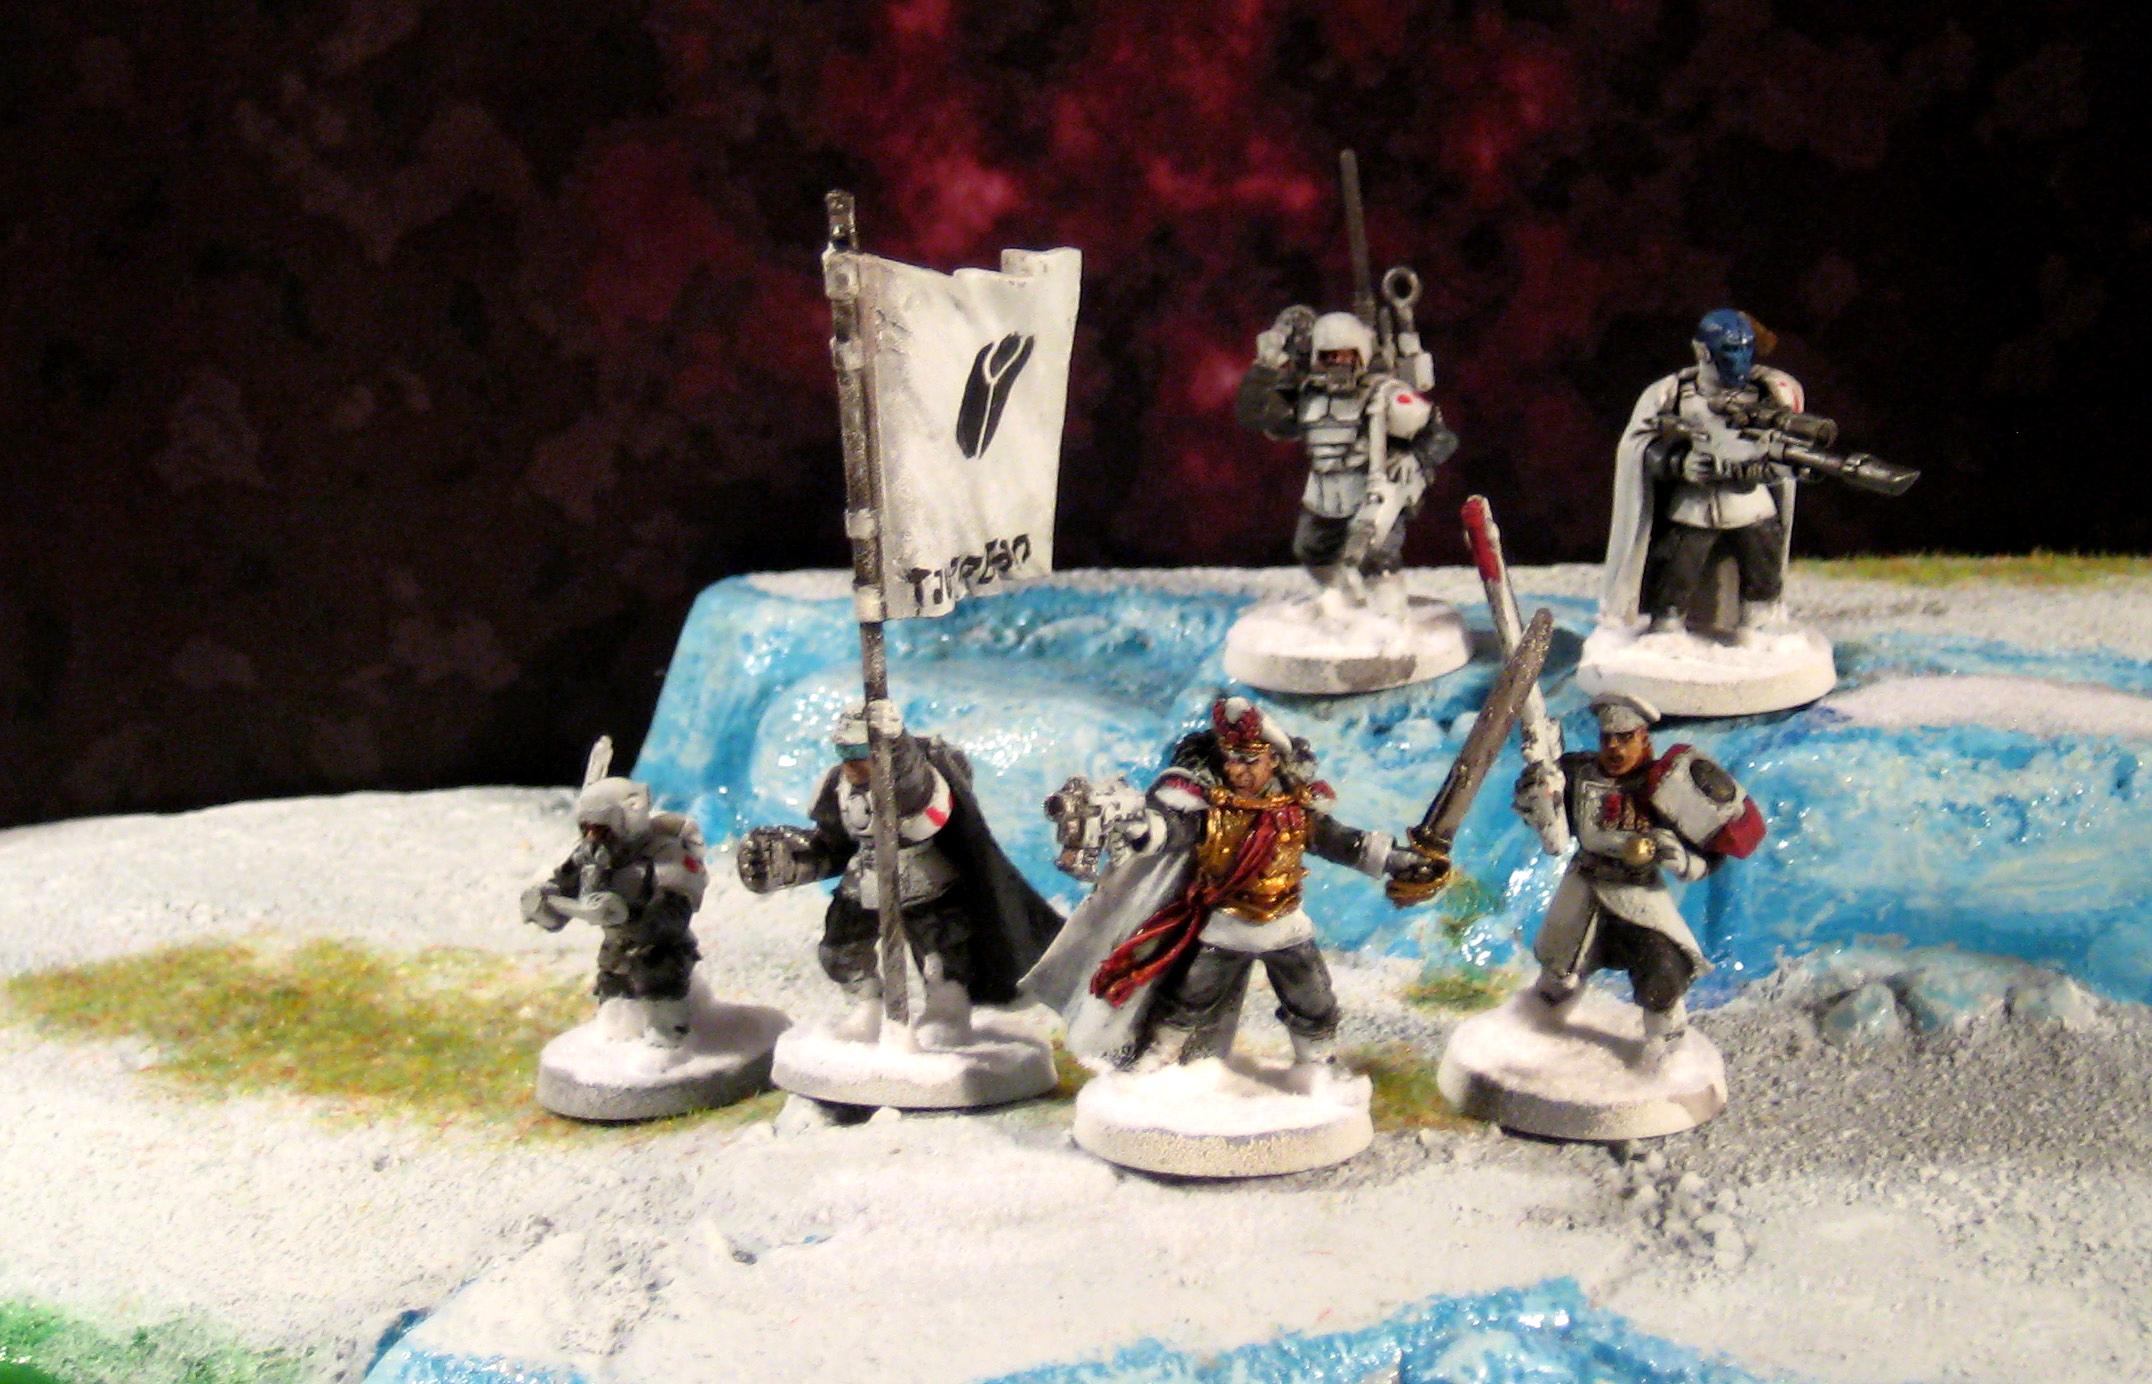 Cadians, Command Squad, Commissar, Company Banner, Conversion, Empire, Gue'vesa, Guevesa, Imperial Guard, Kroot, Lord Commissar, Medic, Officer, Snipers, Snow, Tau, Tau Empire, Vox-caster, White